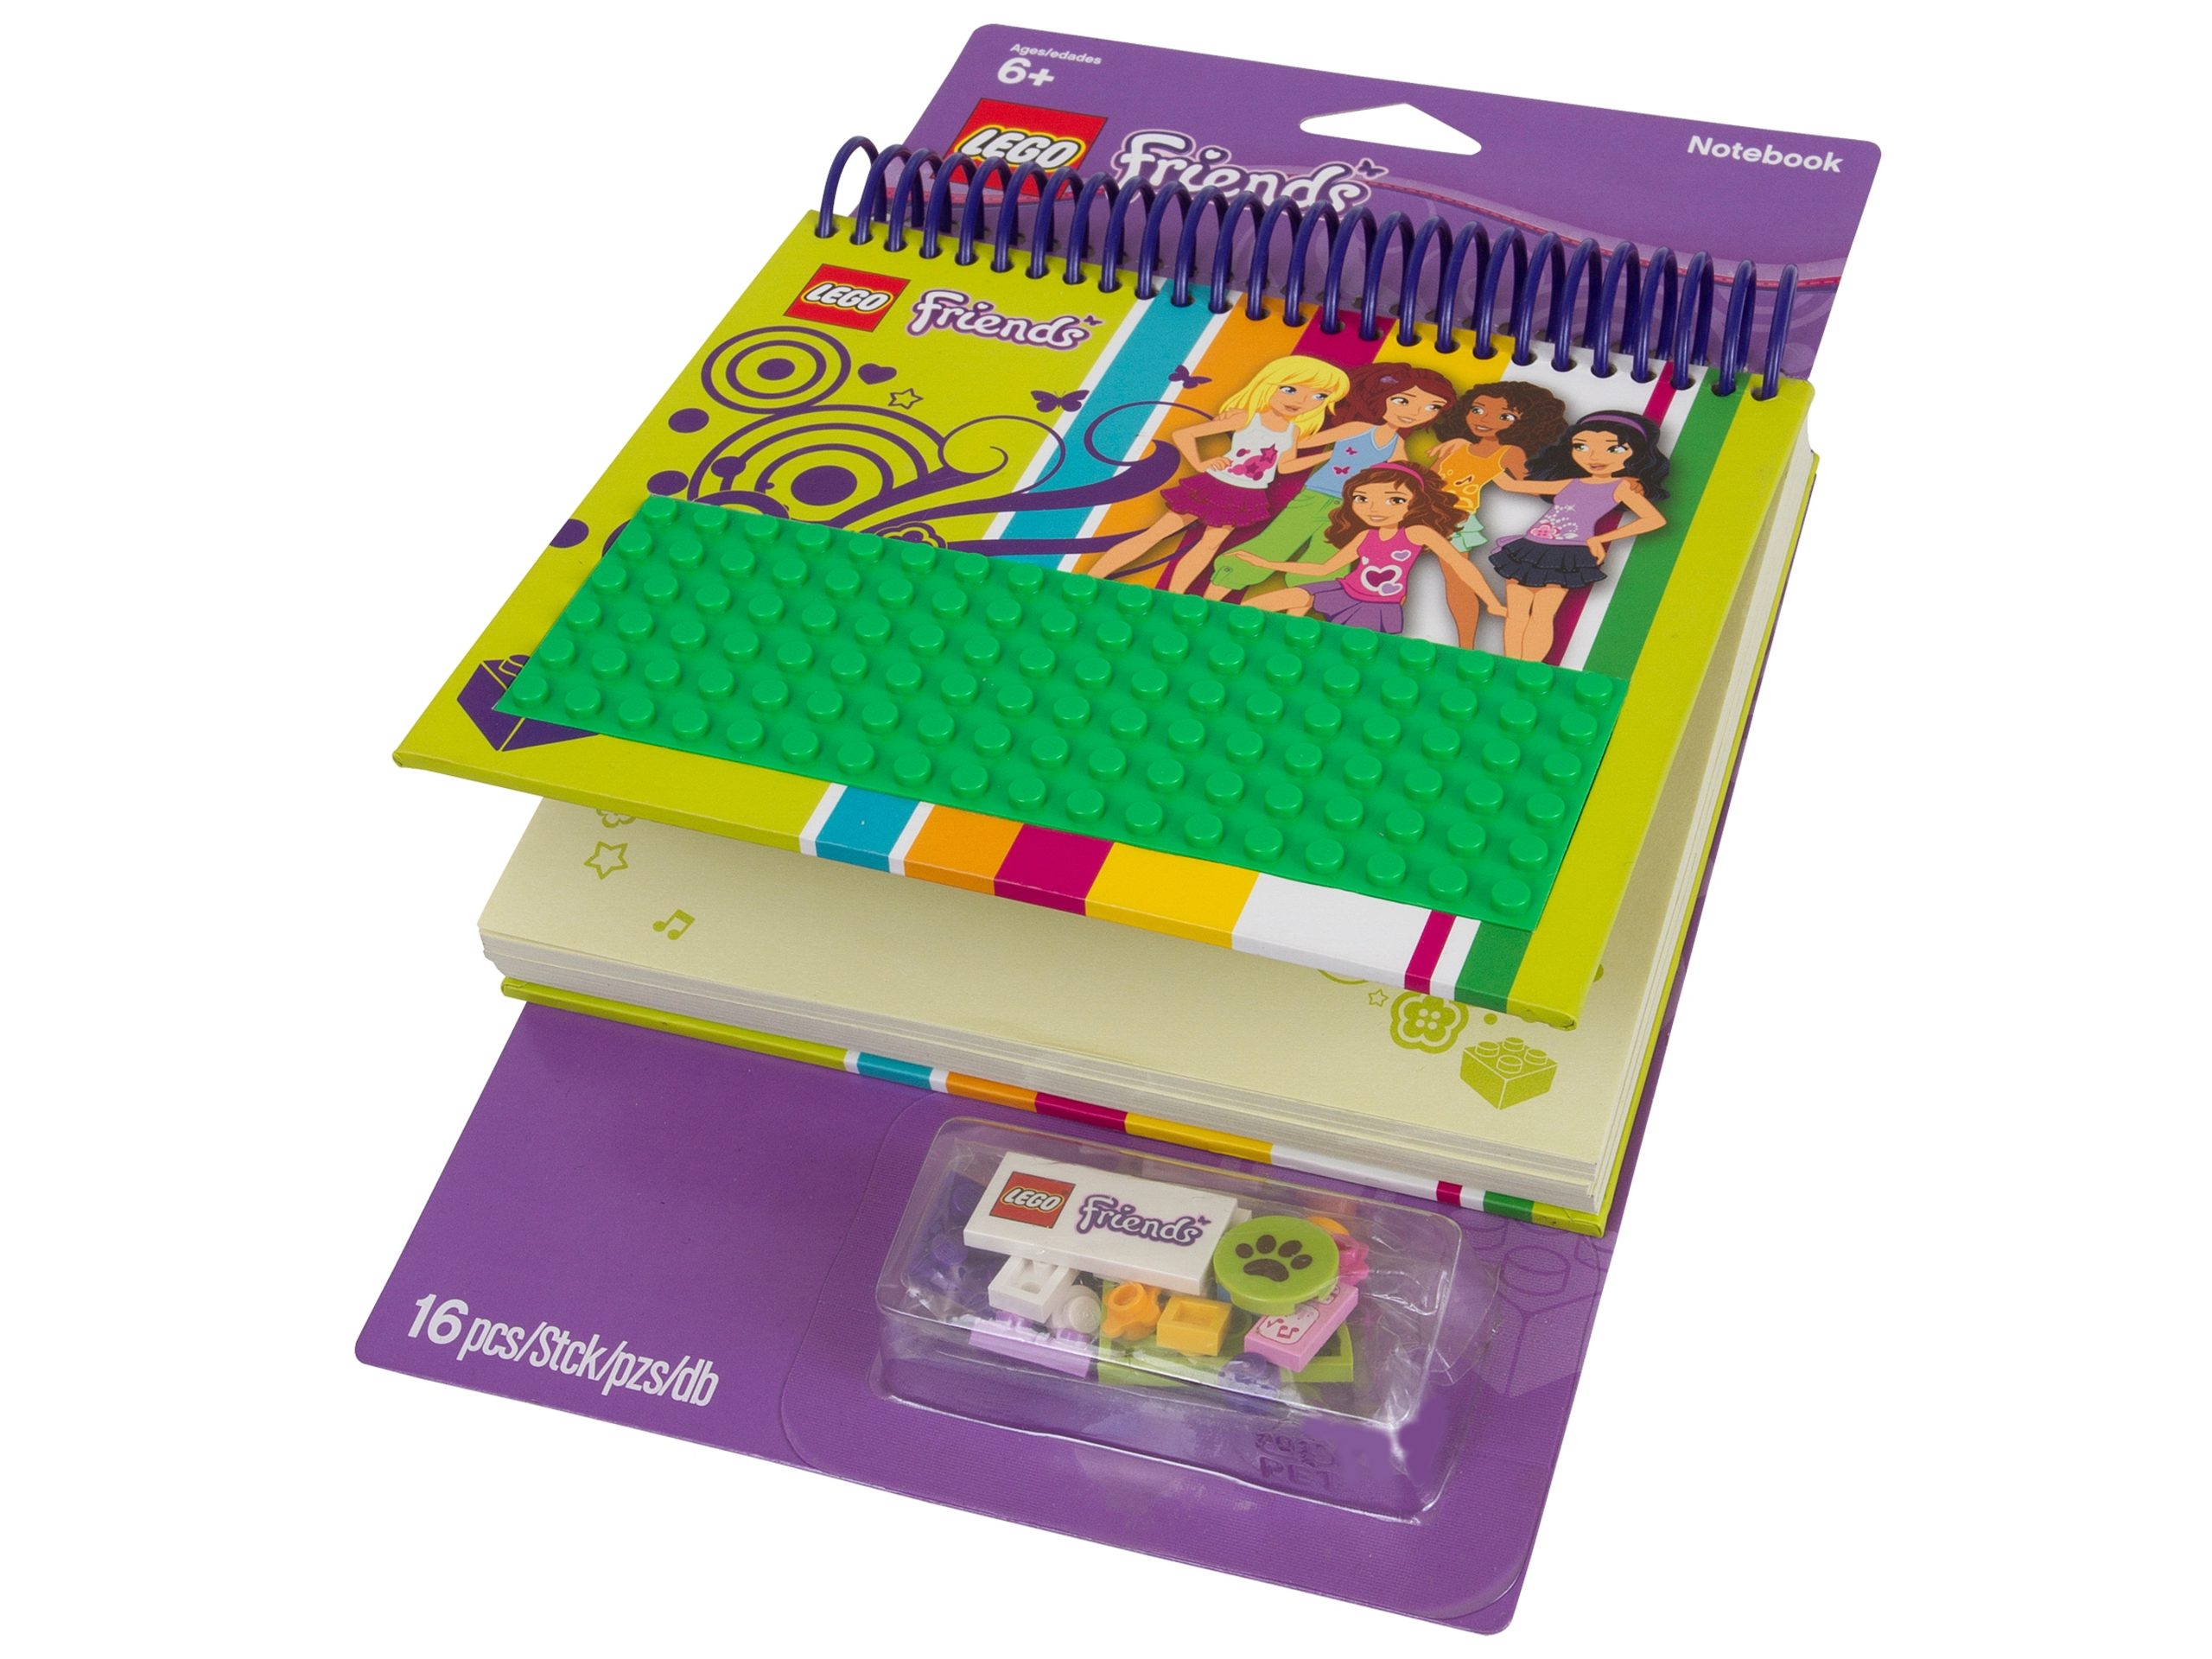 lego 850595 friends notebook scaled